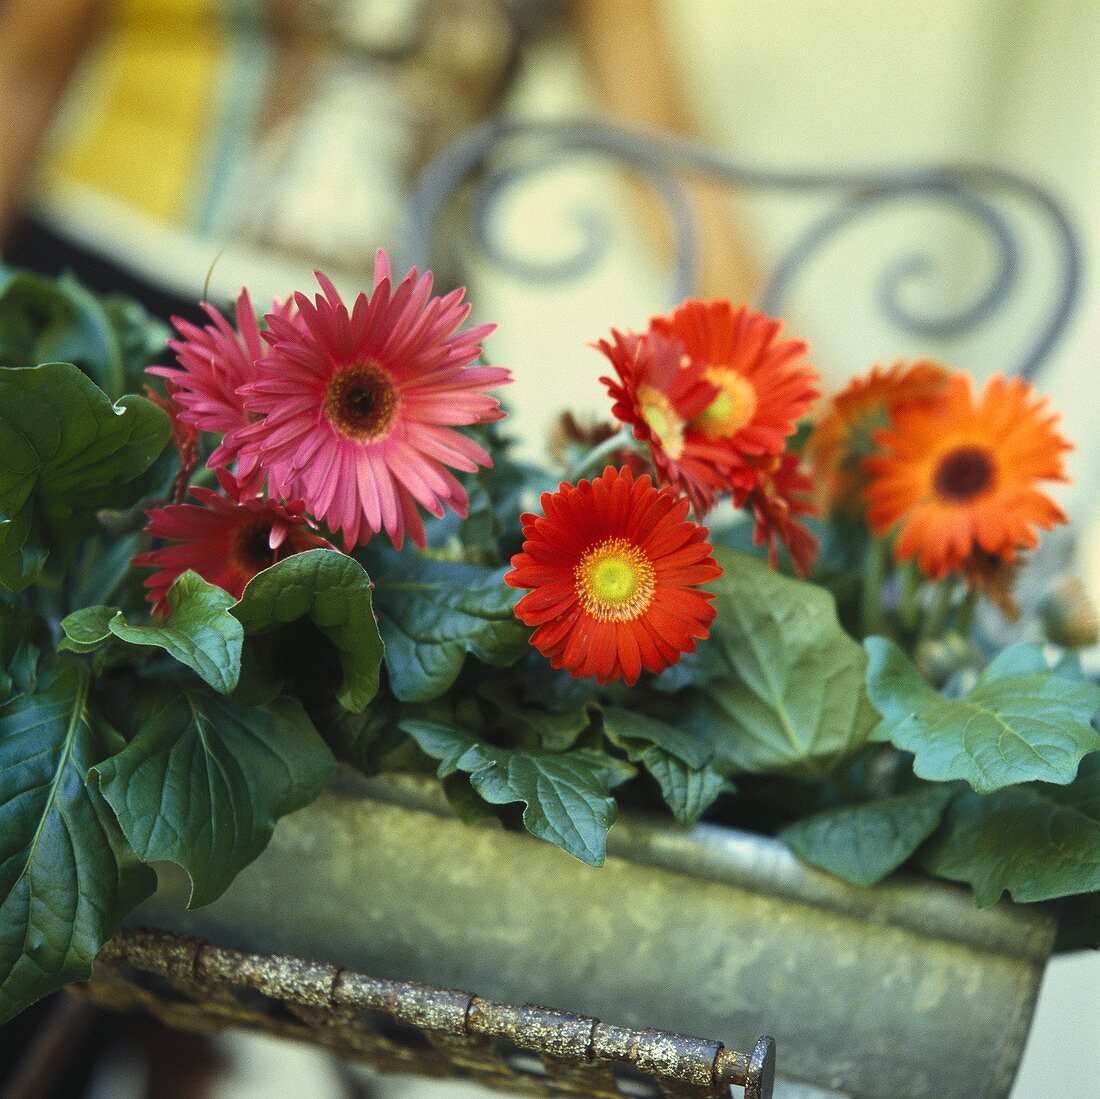 Gutter planted with gerberas